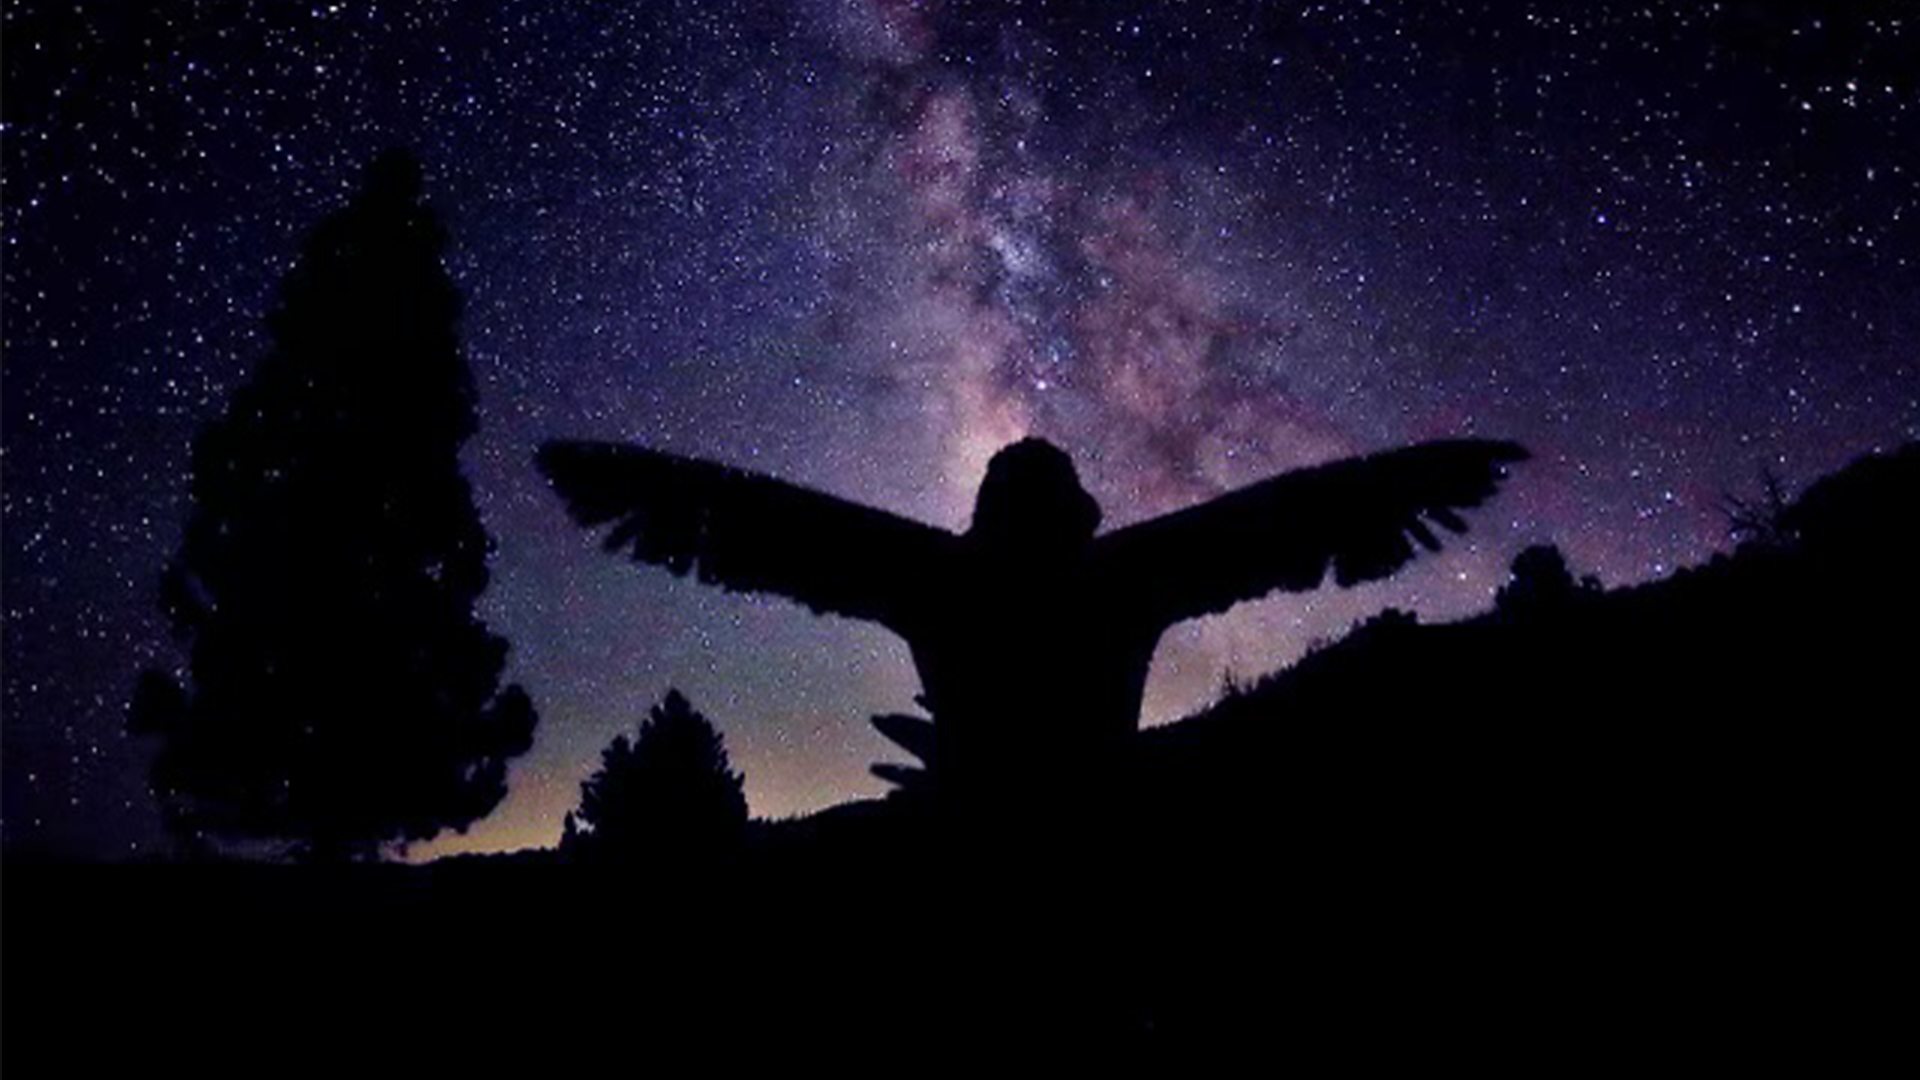 Indigenous sky watching experience in Nevada’s Indian Territory